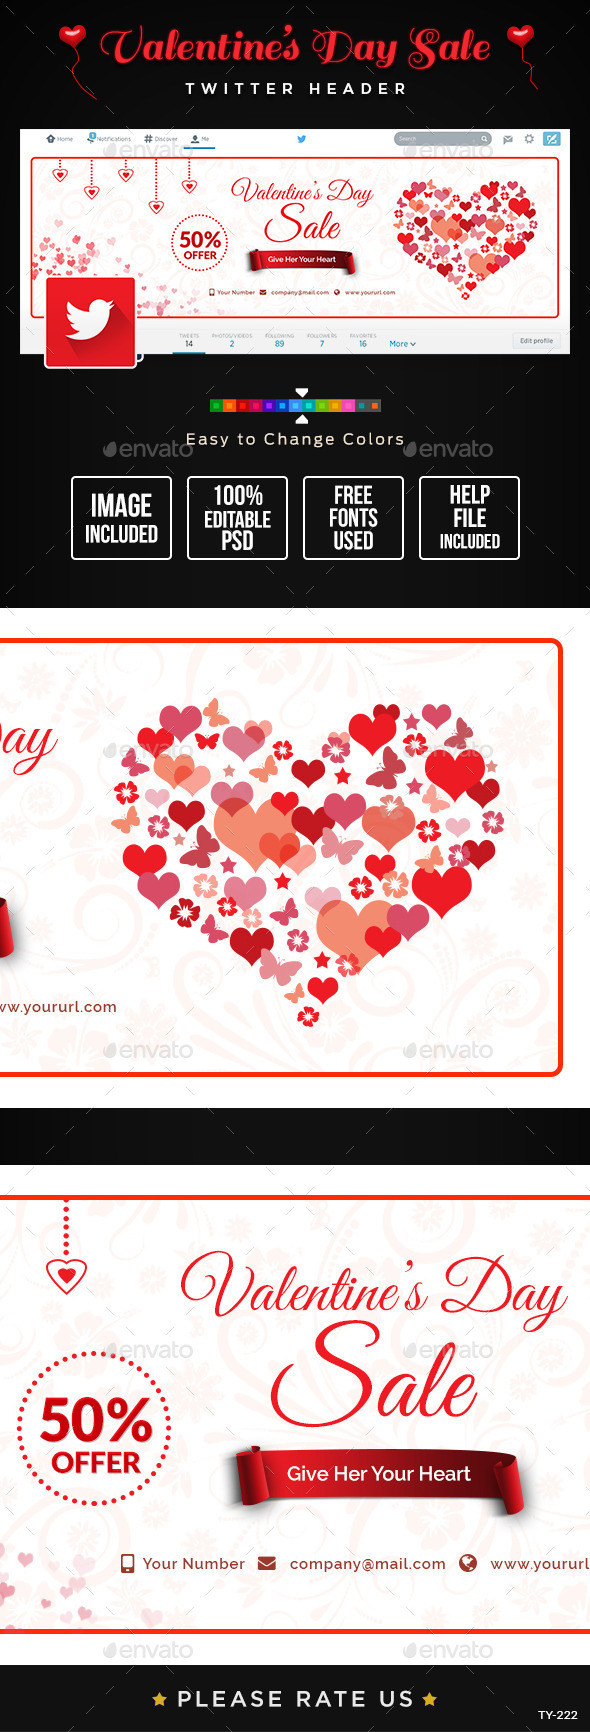 Ty 222 valentines 20day 20design 20twitter preview